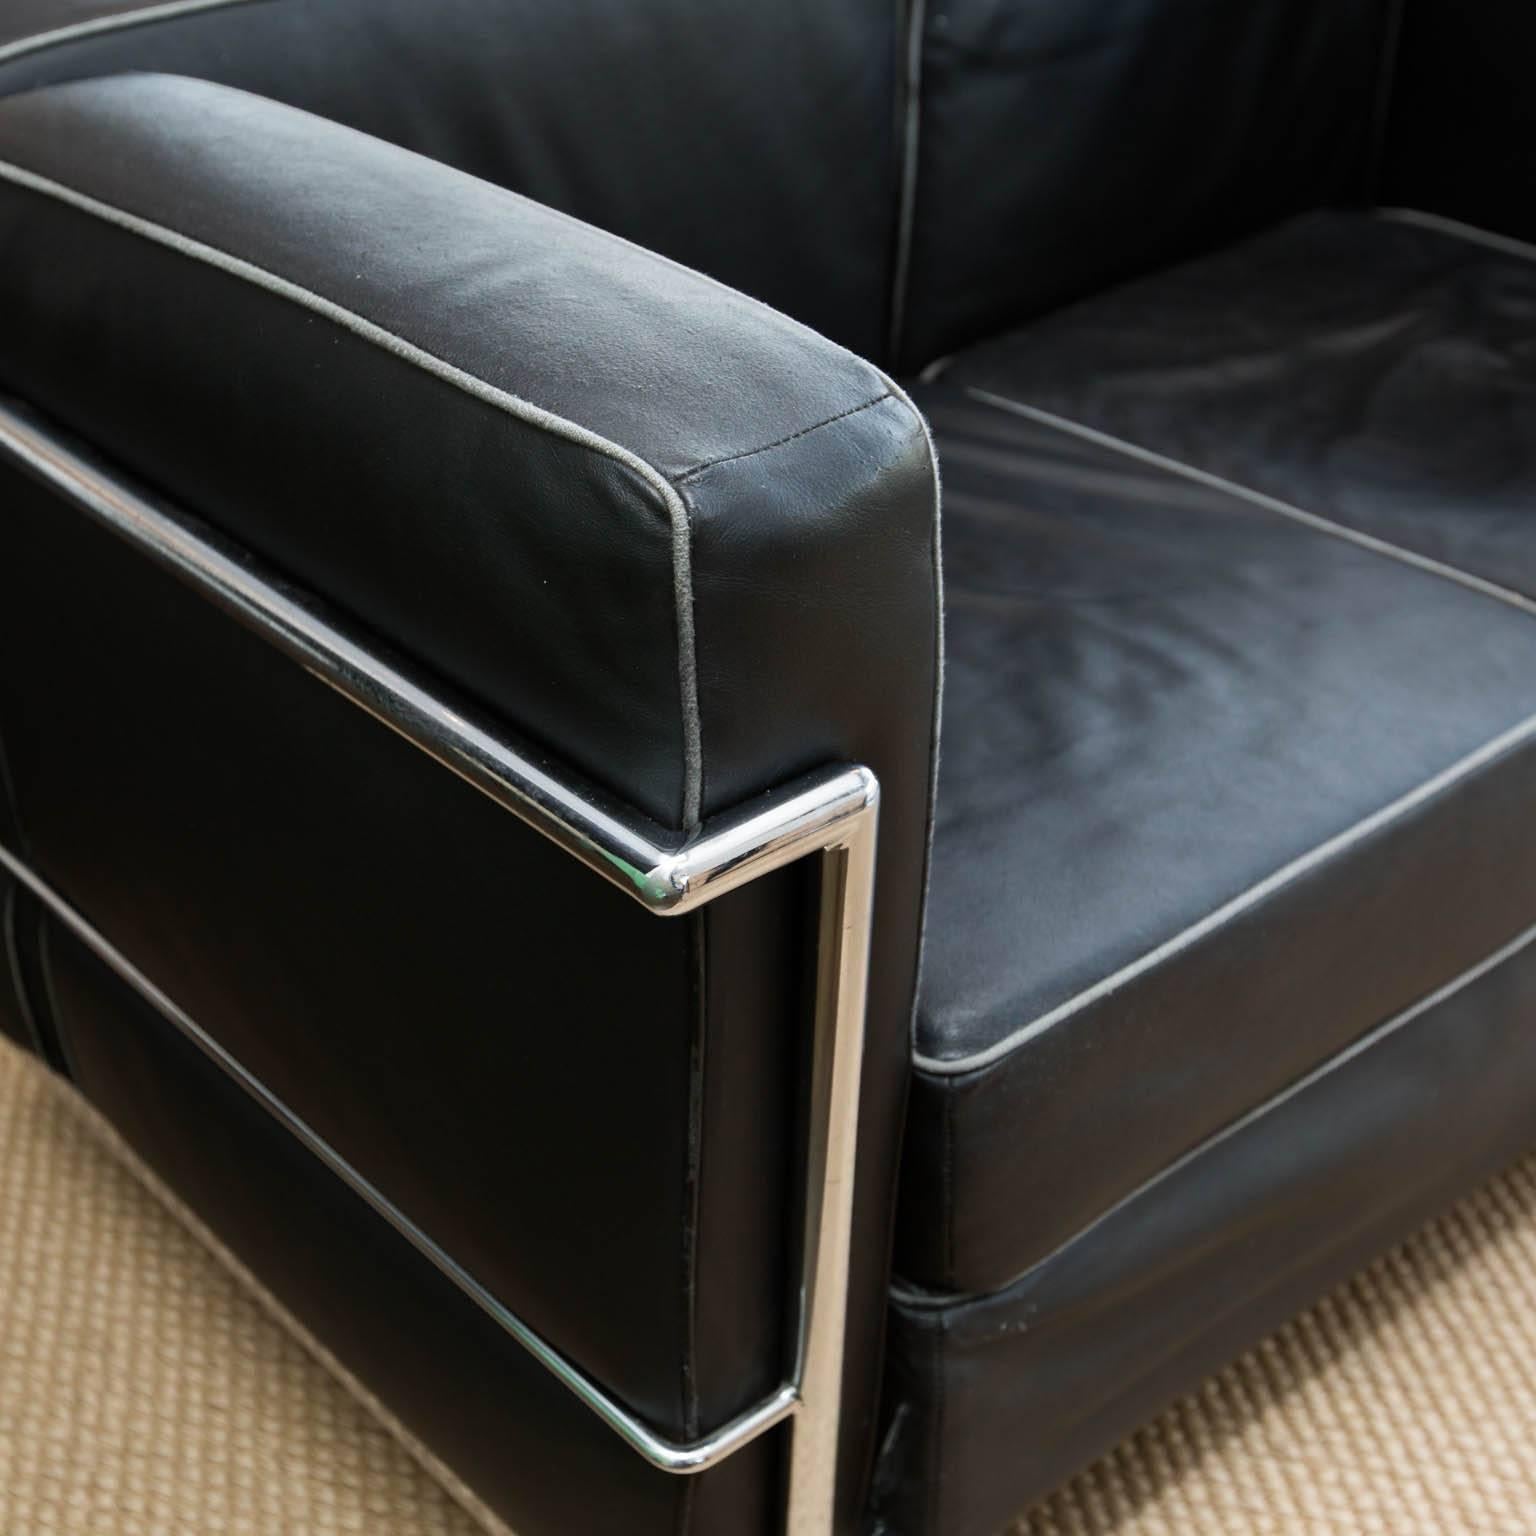 Nice reproduction in black leather with light grey fabric piping.